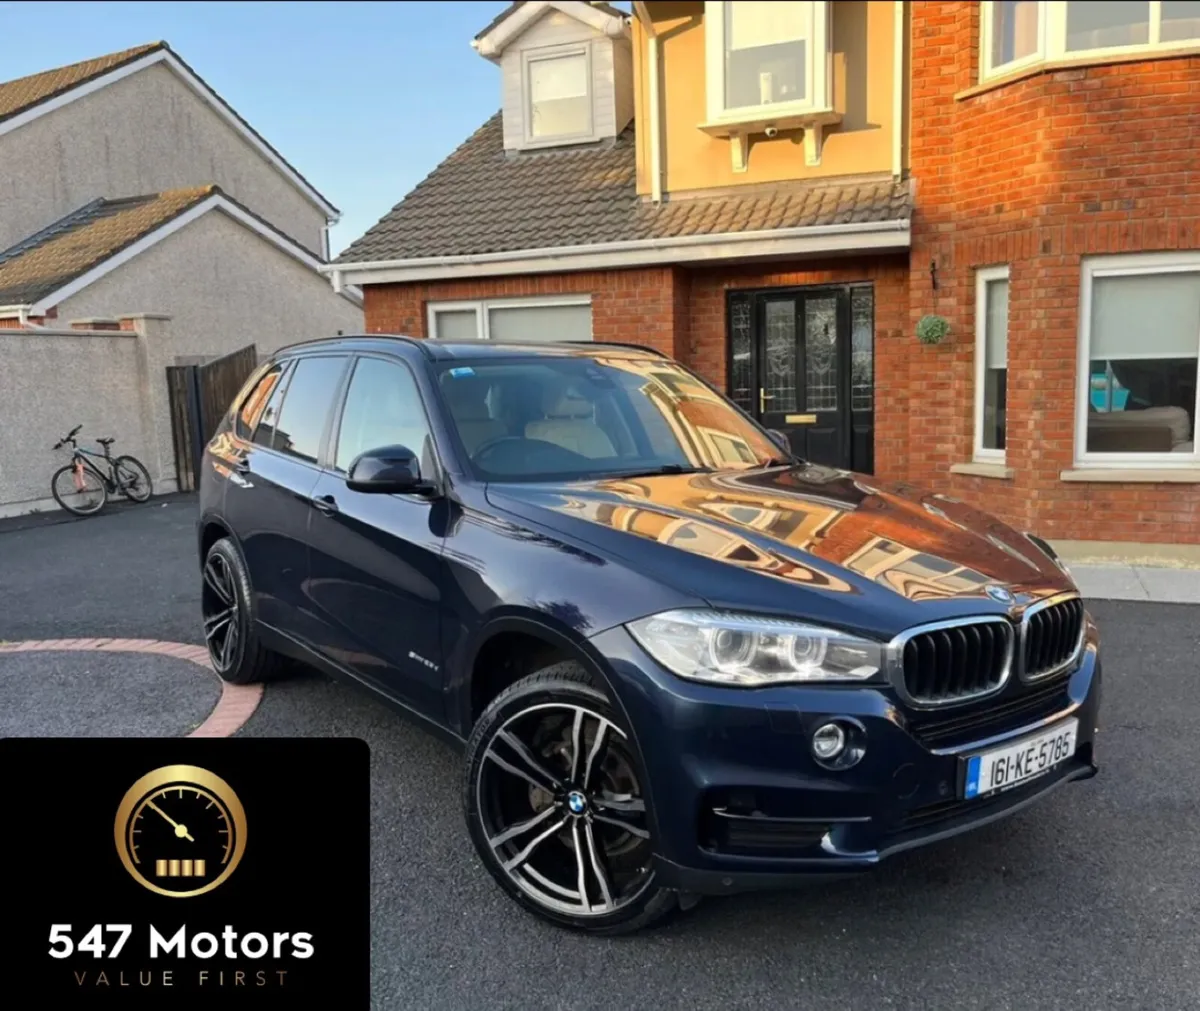 BMW X5 2016 7 Seater 25d New NCT